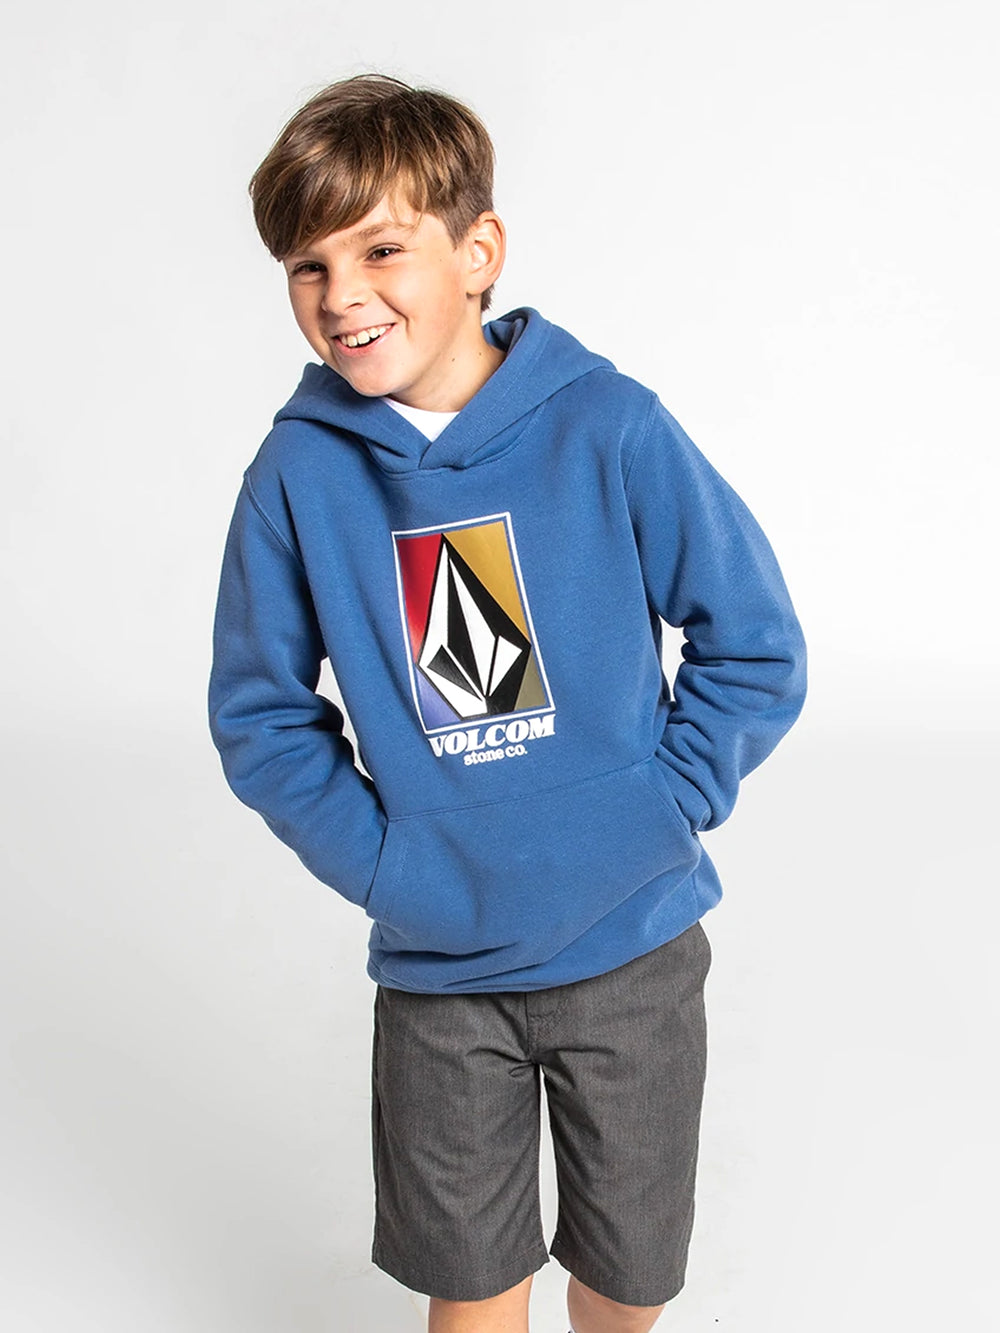 VOLCOM YOUTH BOYS CATCH 91 HOODIE - CLEARANCE